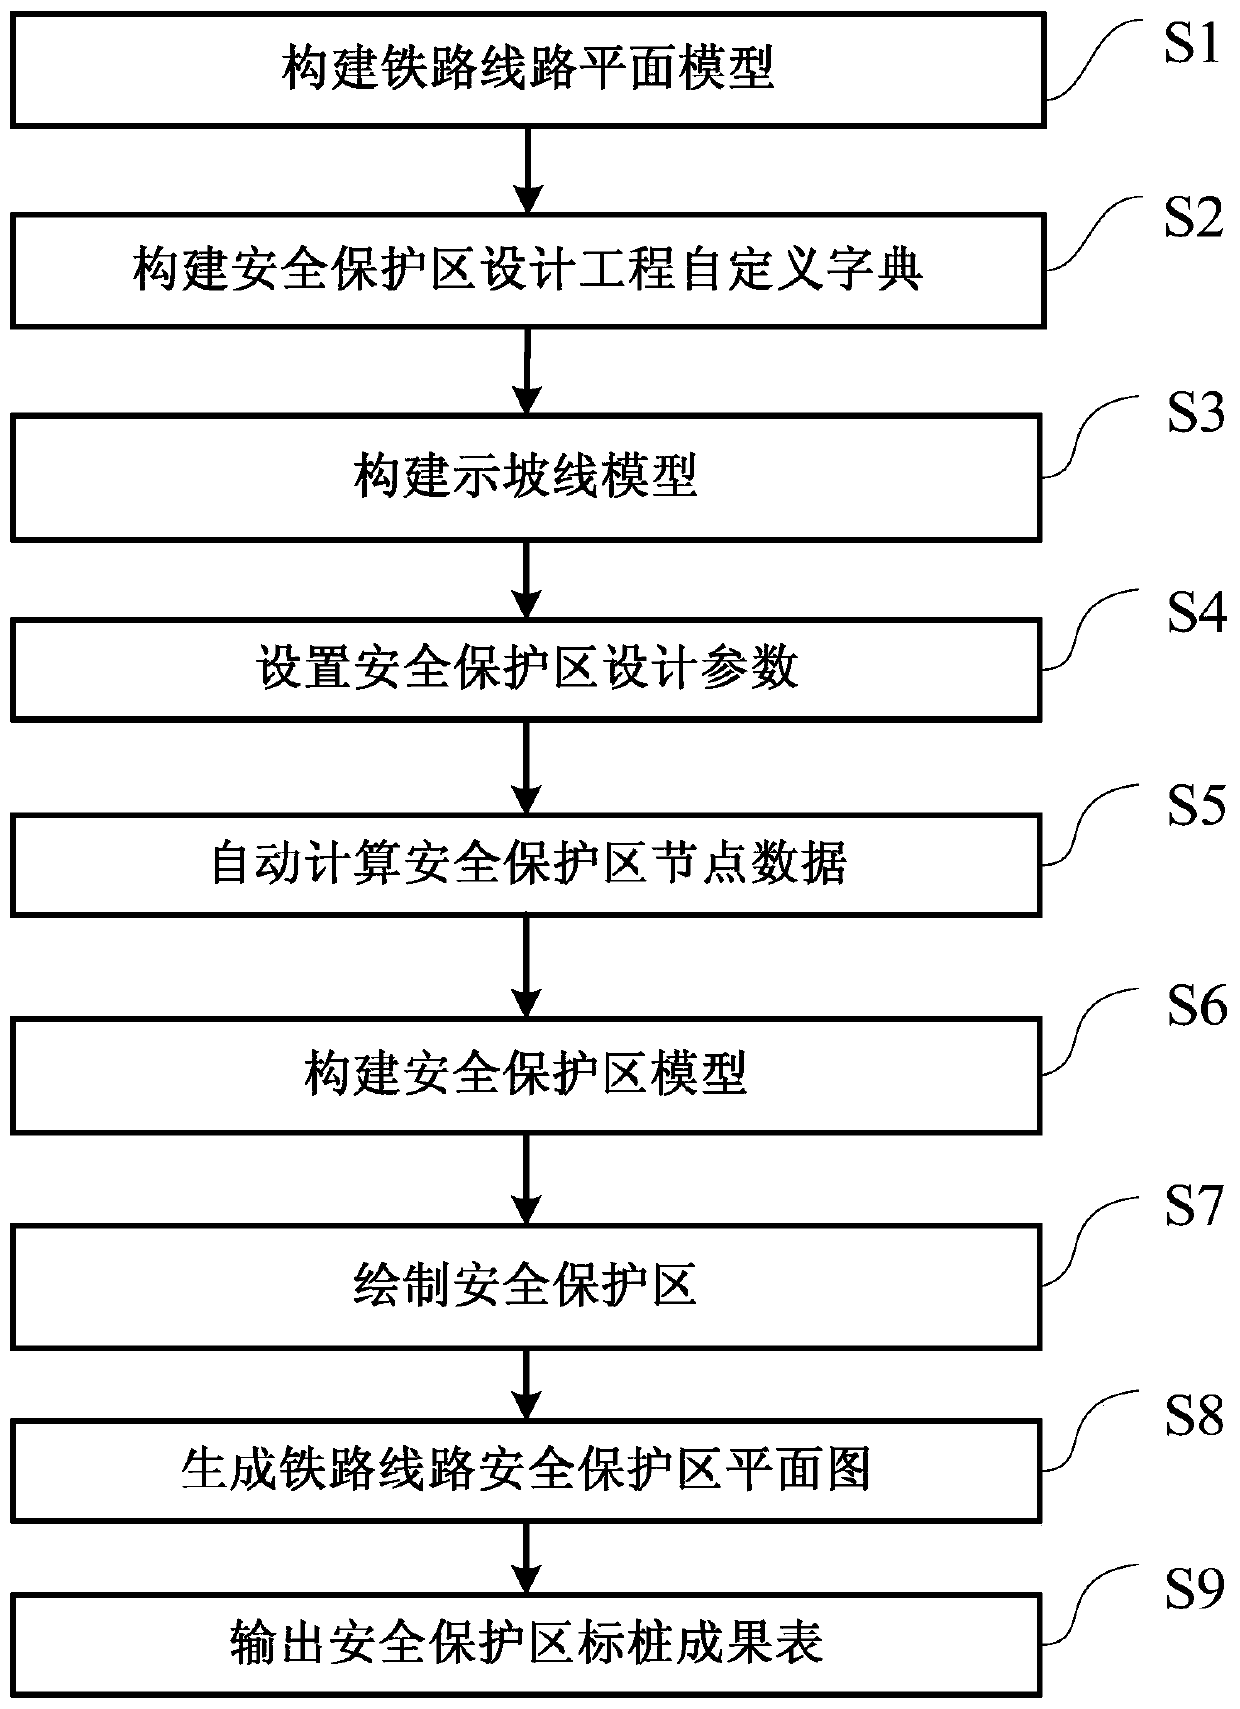 Automatic Design Method of Railway Line Safety Protection Area